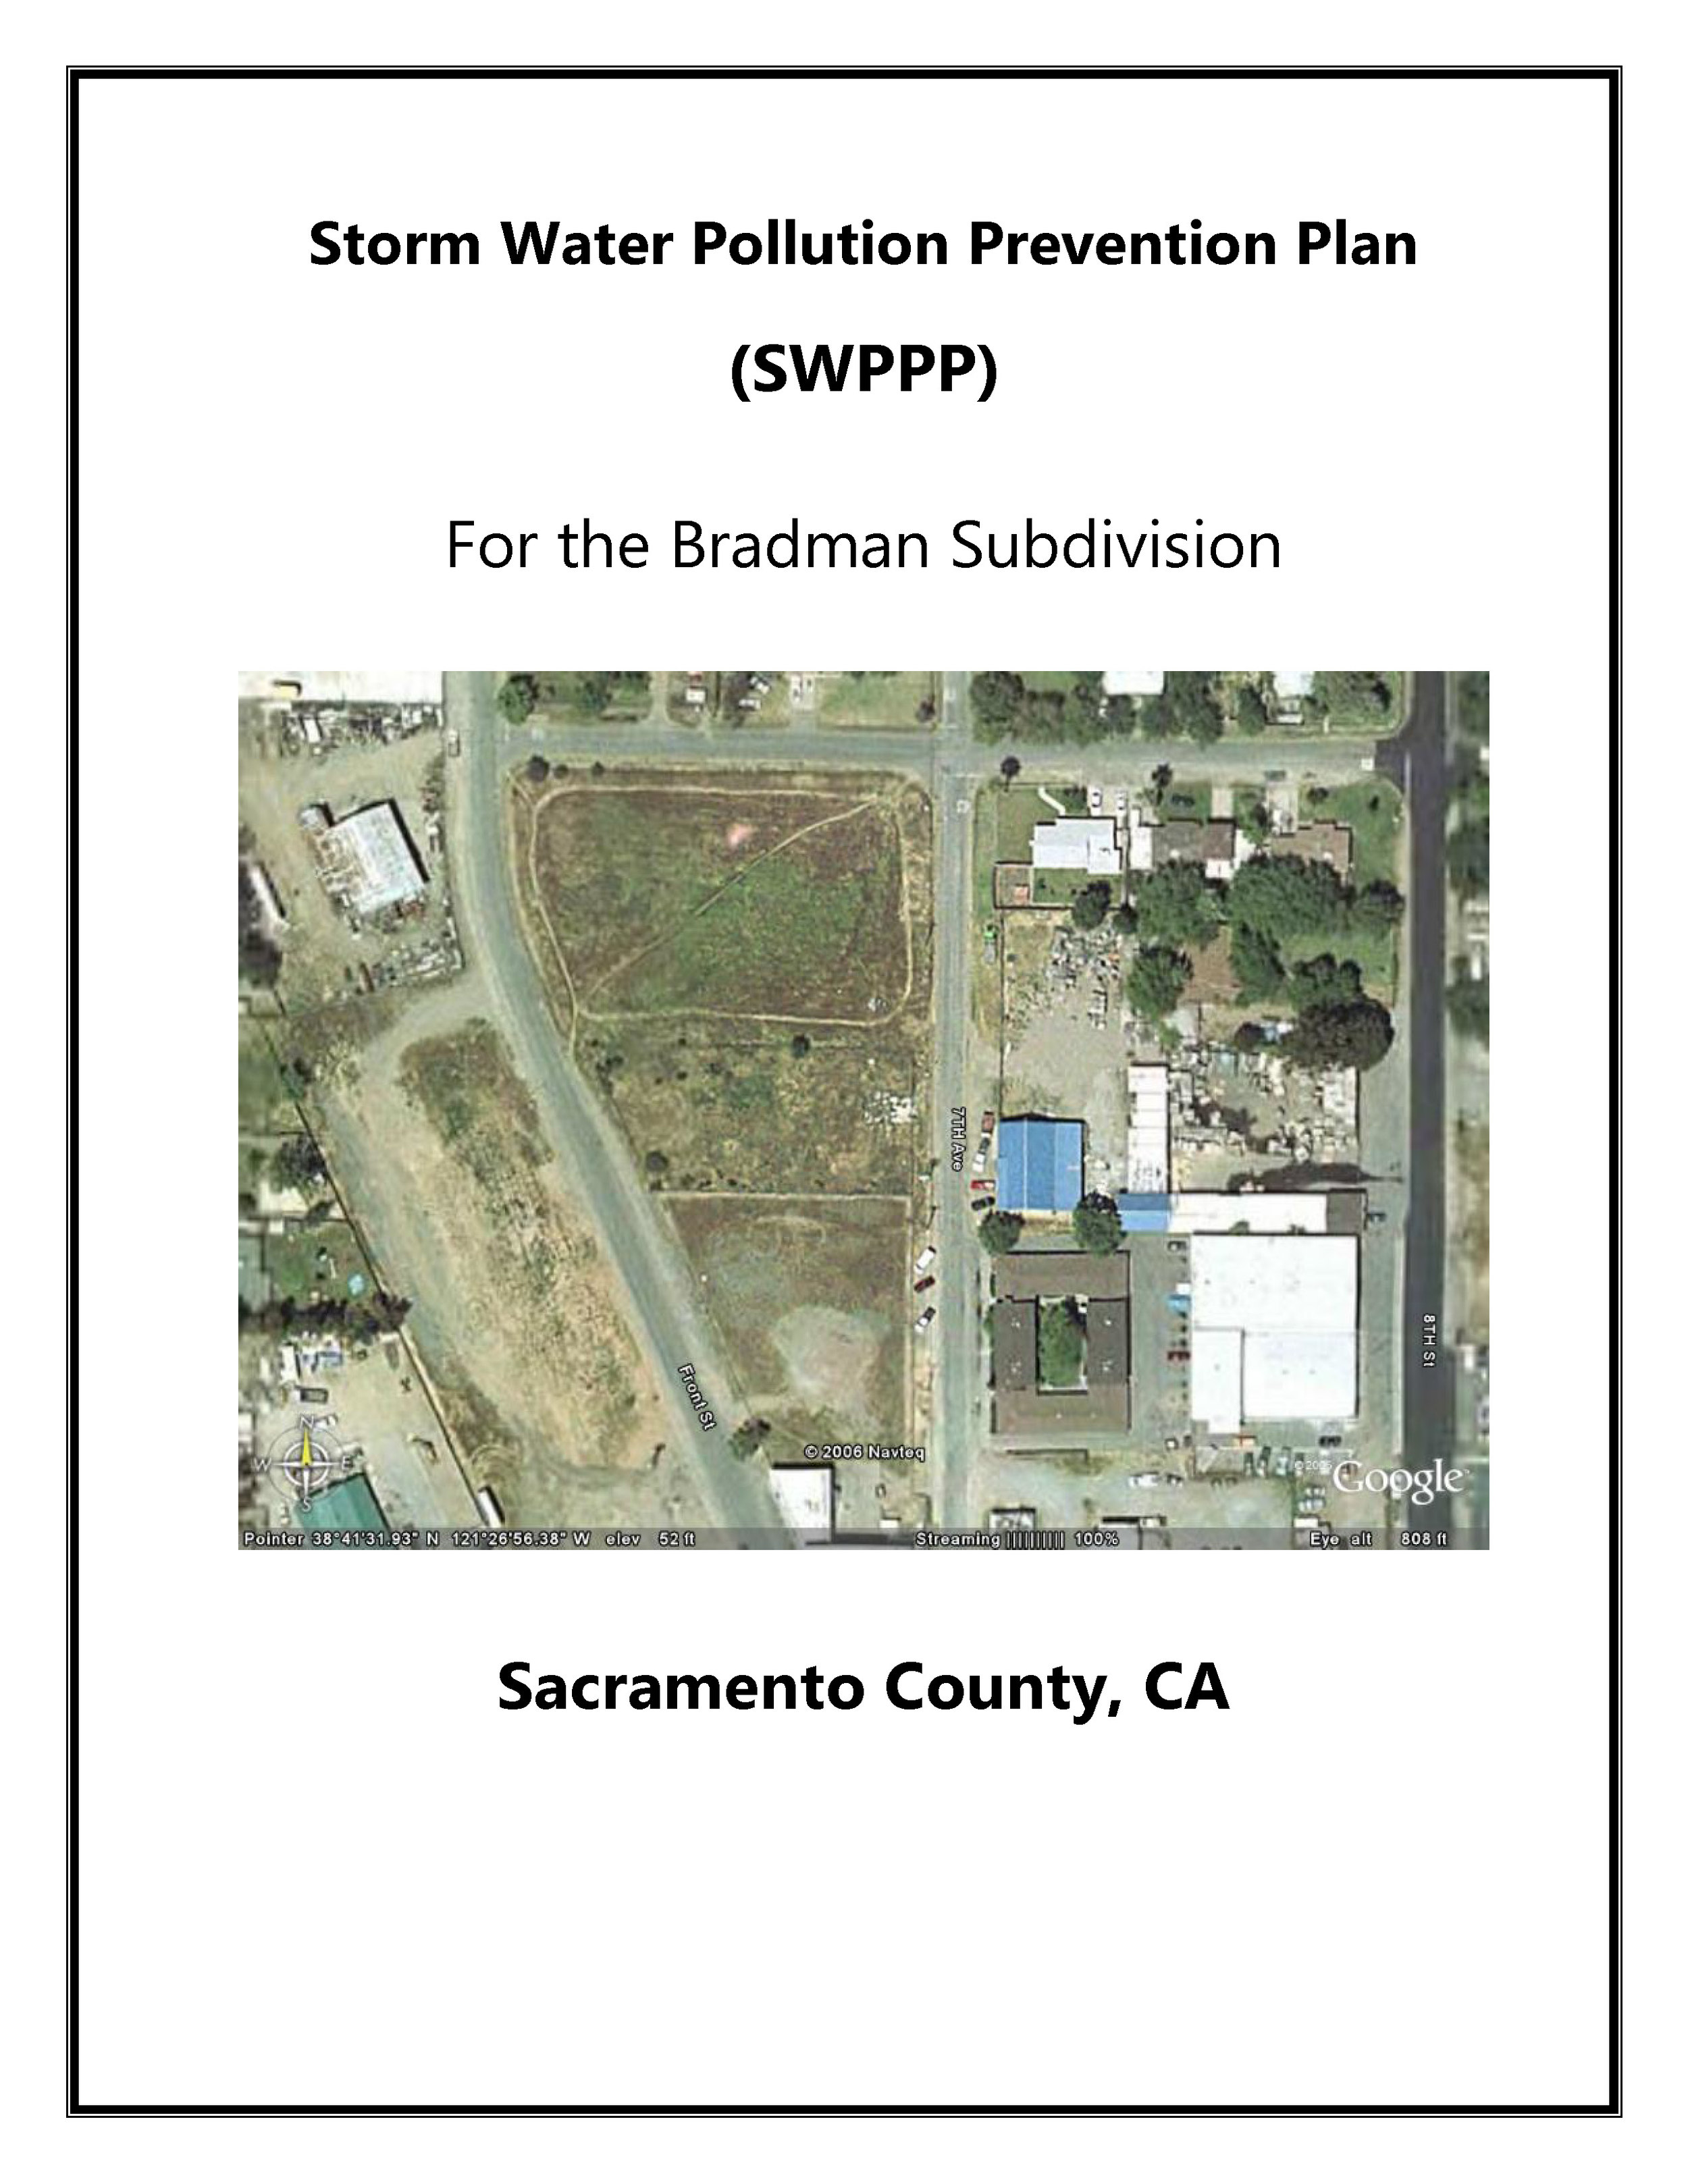   2006   Storm Water Pollution Prevention Plan (SWPPP) for Bradman Subdivision 